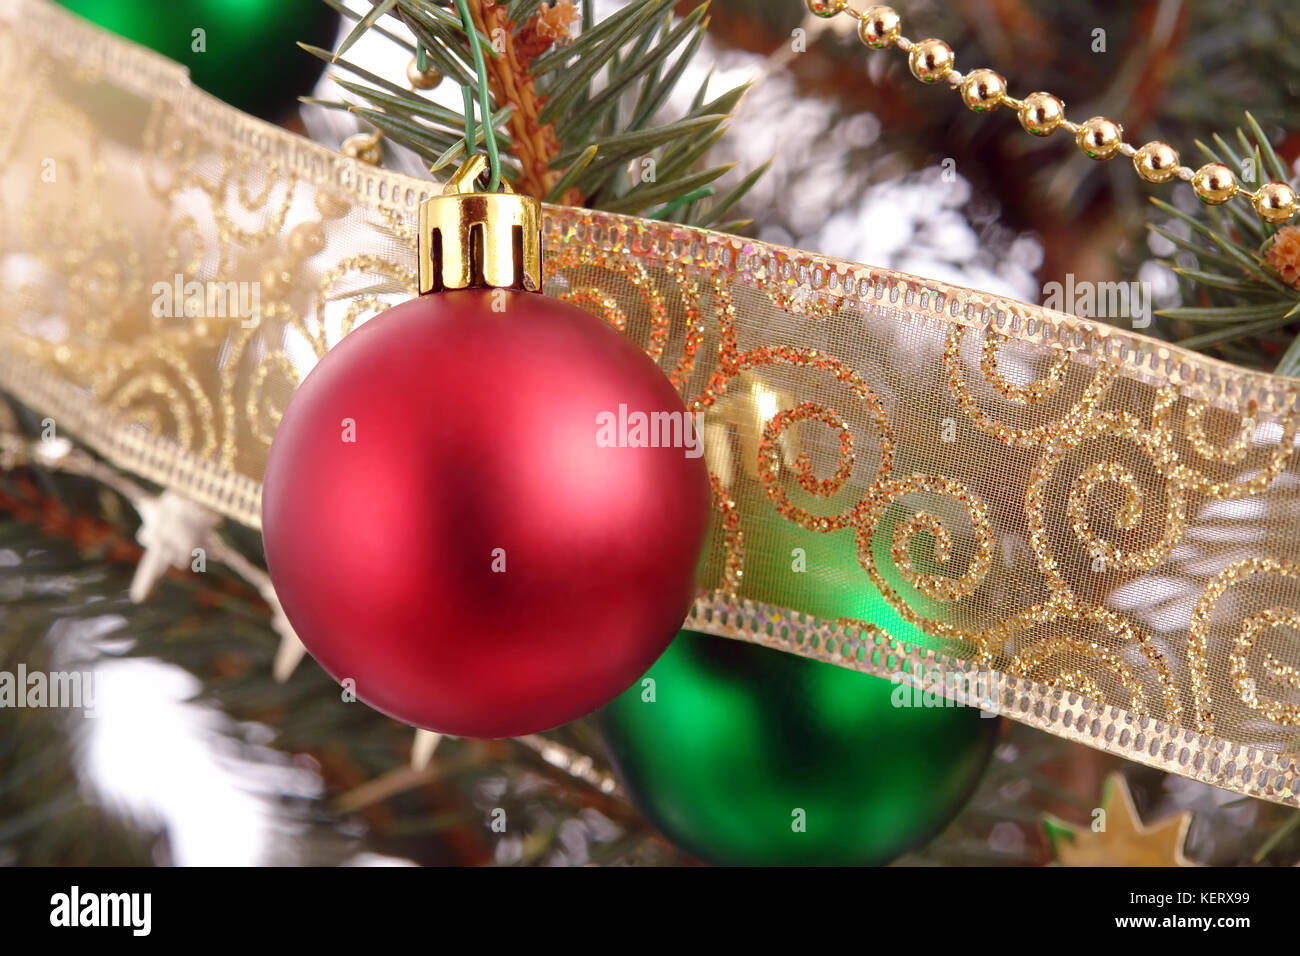 Red christmas ball with golden ornaments hanging on spruce branch Stock Photo